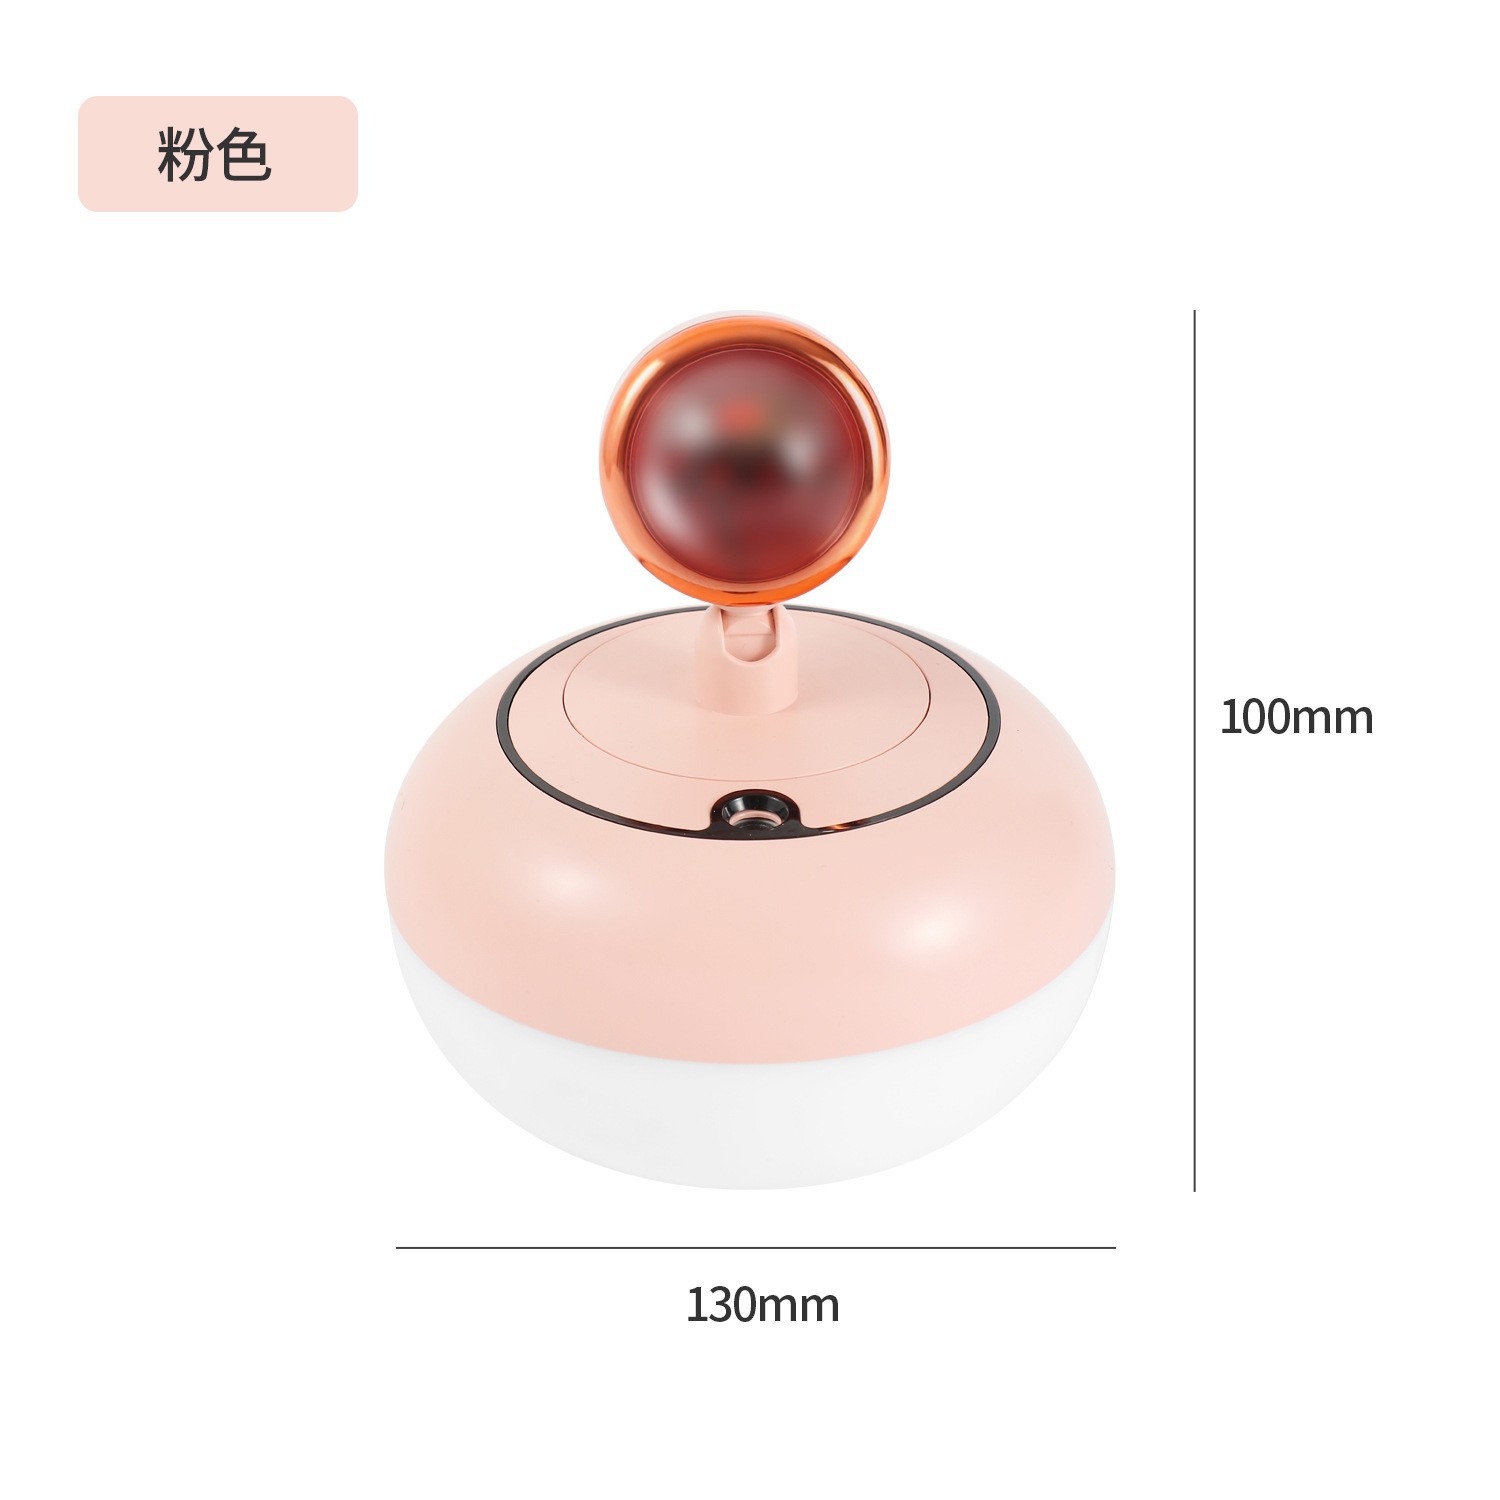 Factory Direct Sales New Creative Atmosphere Night Light Sunset Sunset Light Humidifier Home Bedroom Water Replenishing Instrument